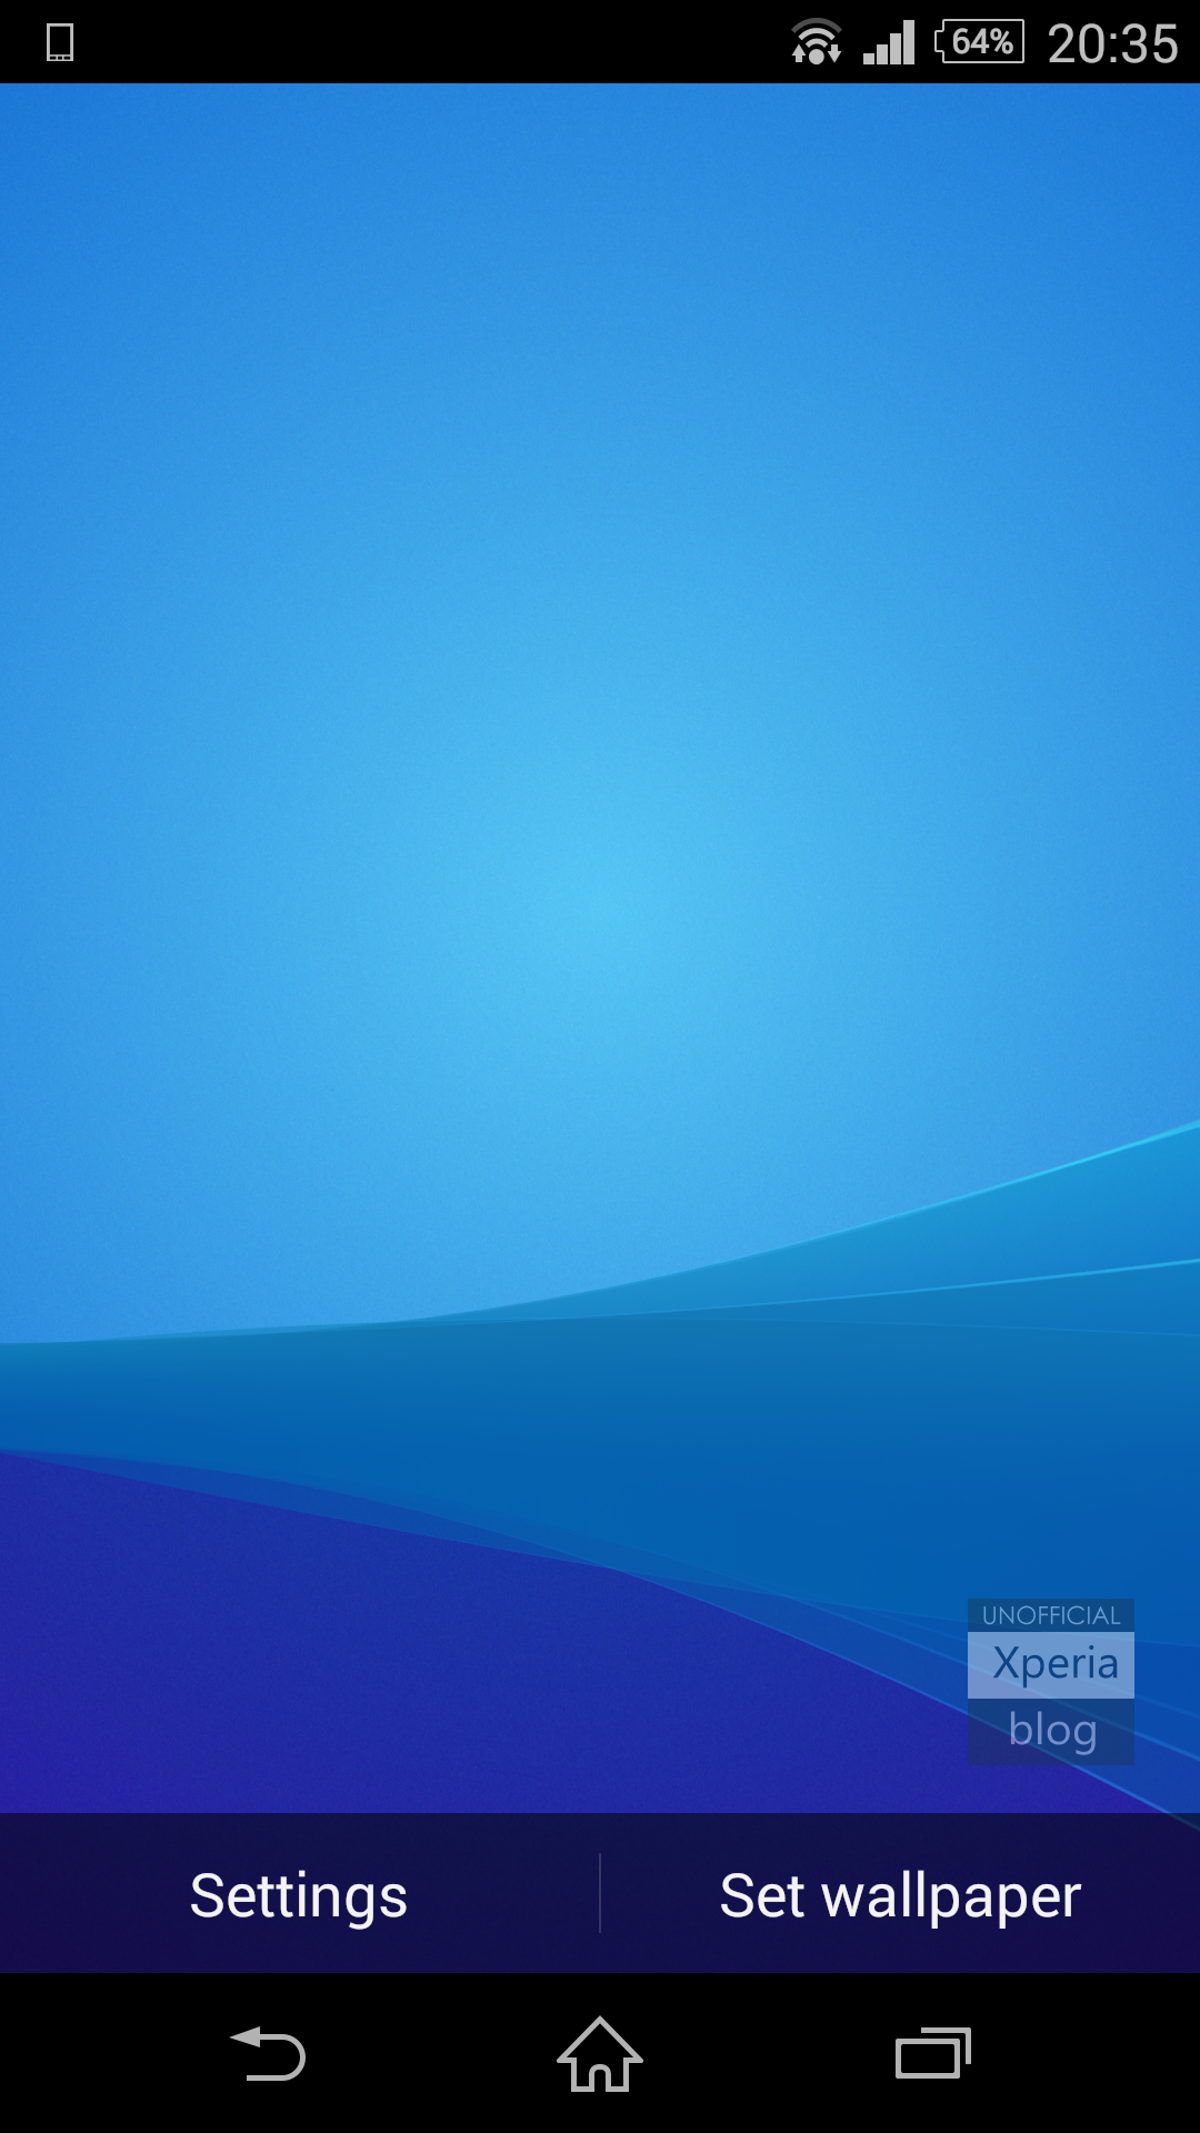 Xperia Z3 Plus Live Wallpaper now available for all | Xperia Blog